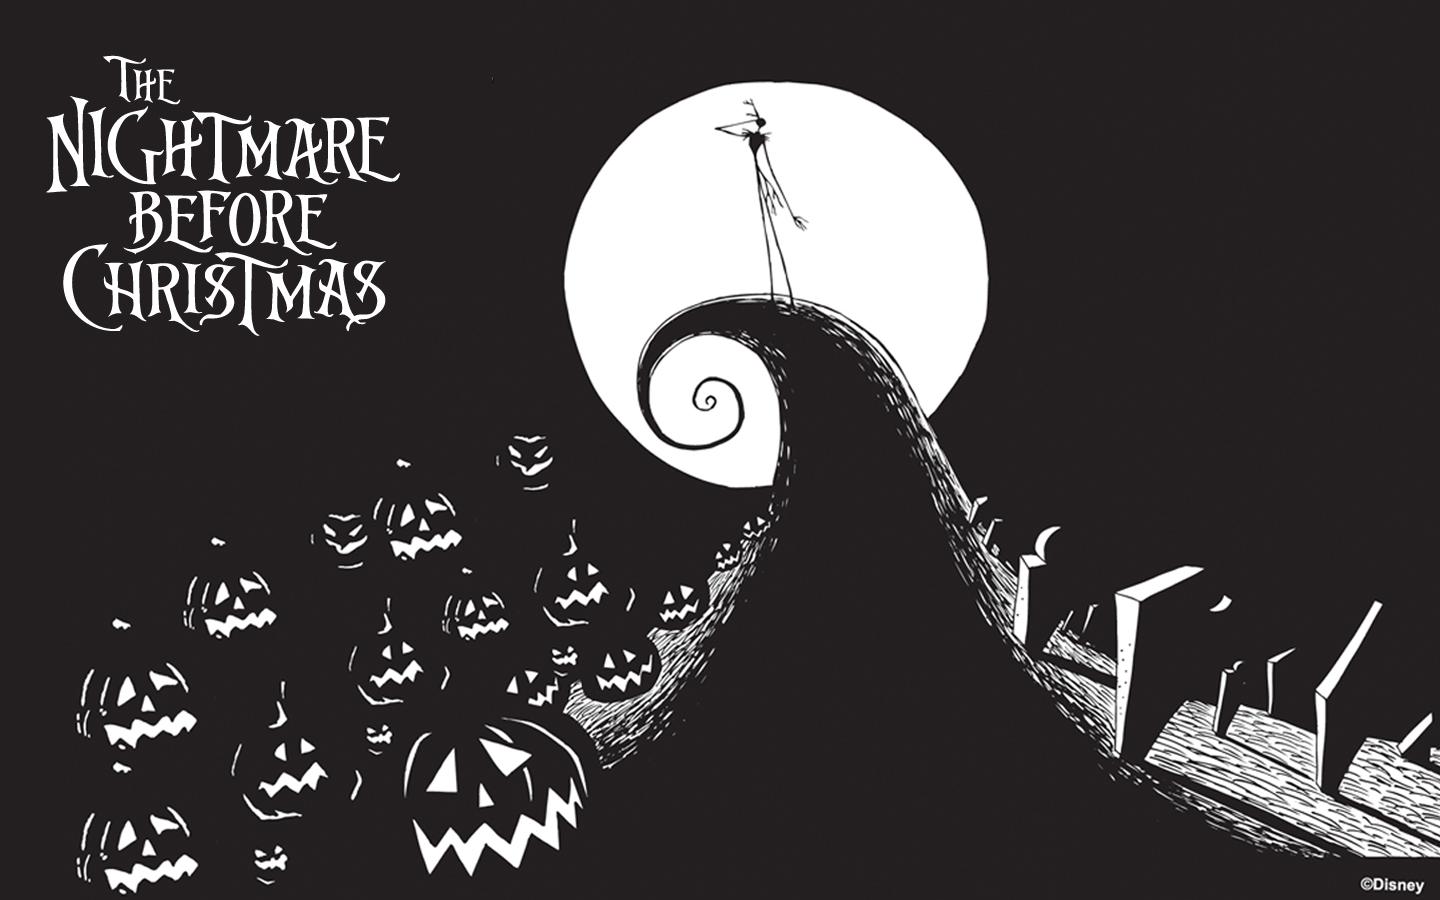 Image Gallery Of The Nightmare Before Christmas Go To Trailer For